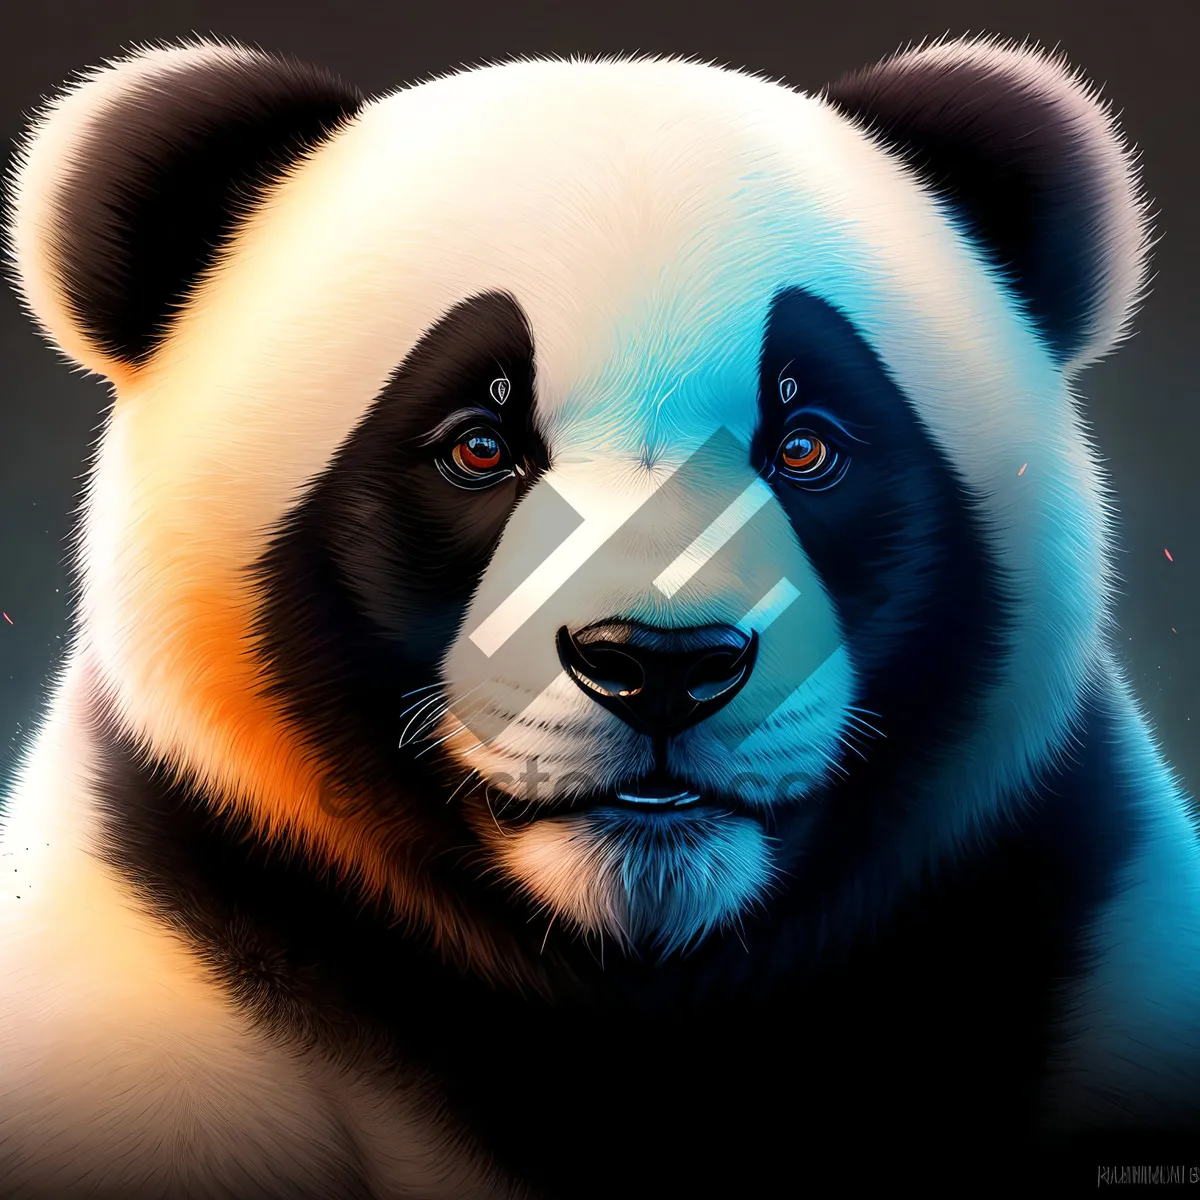 Picture of Adorable Black and White Giant Panda Bear